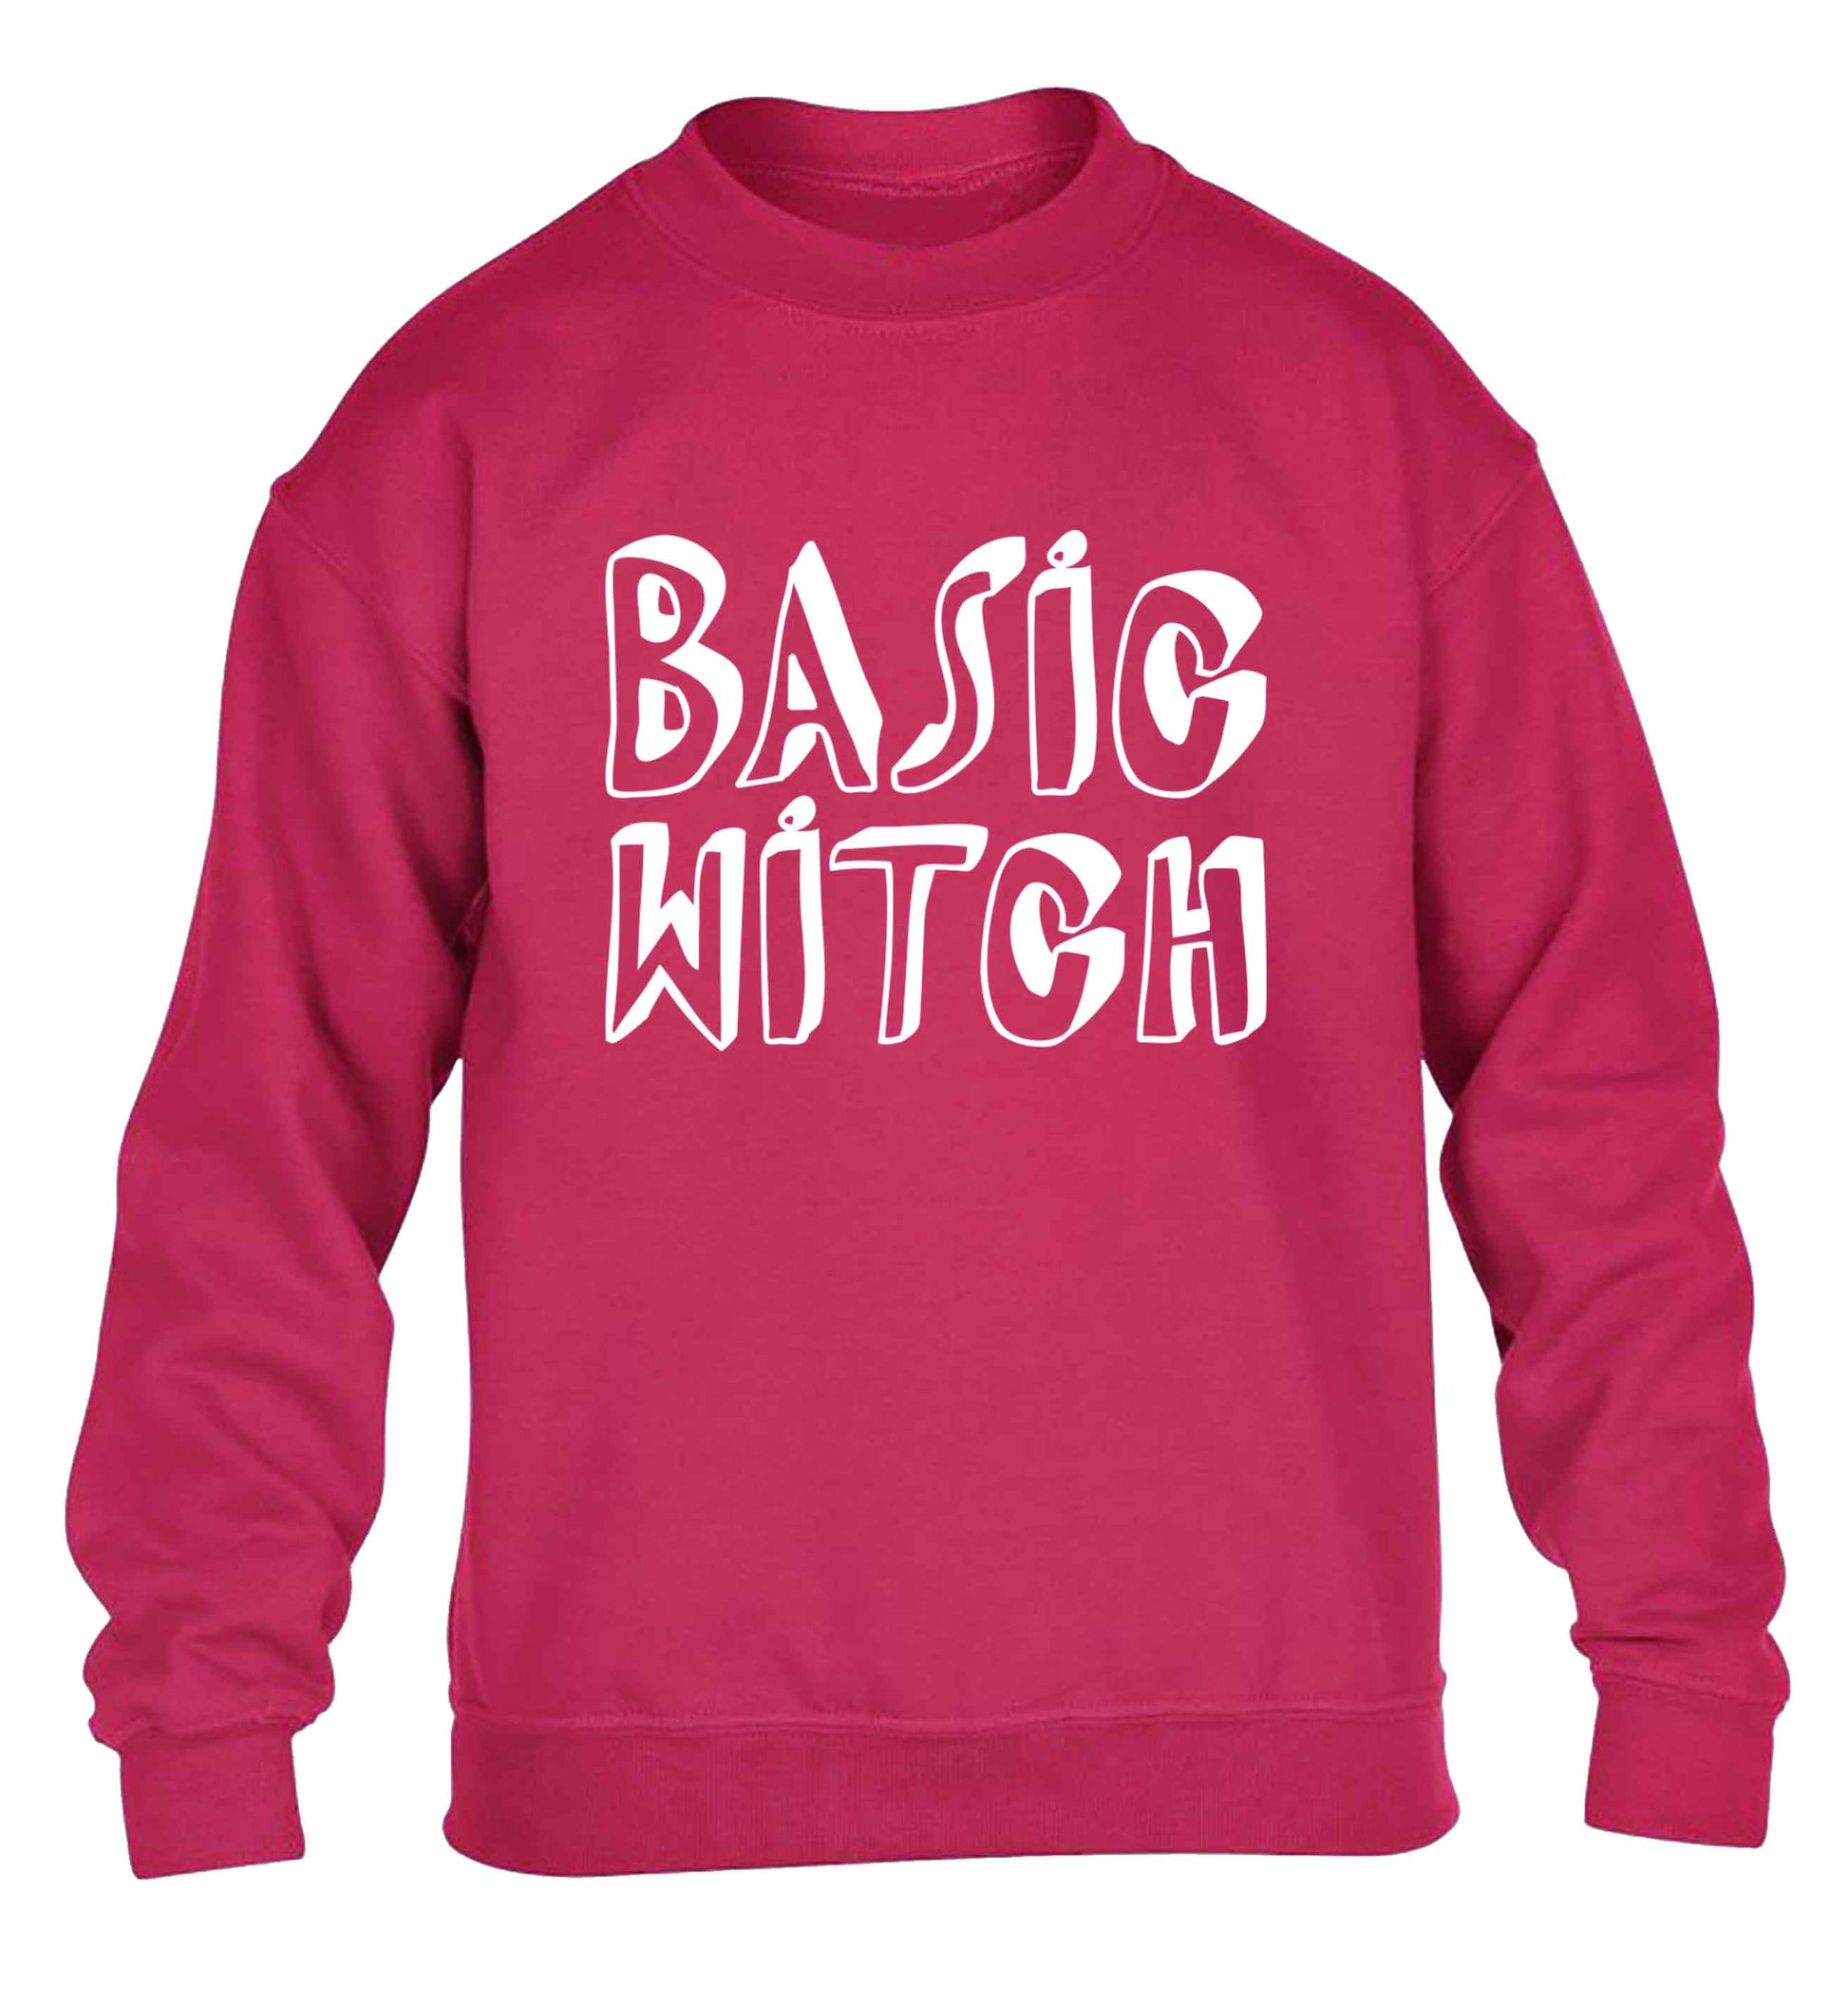 Basic witch children's pink sweater 12-13 Years